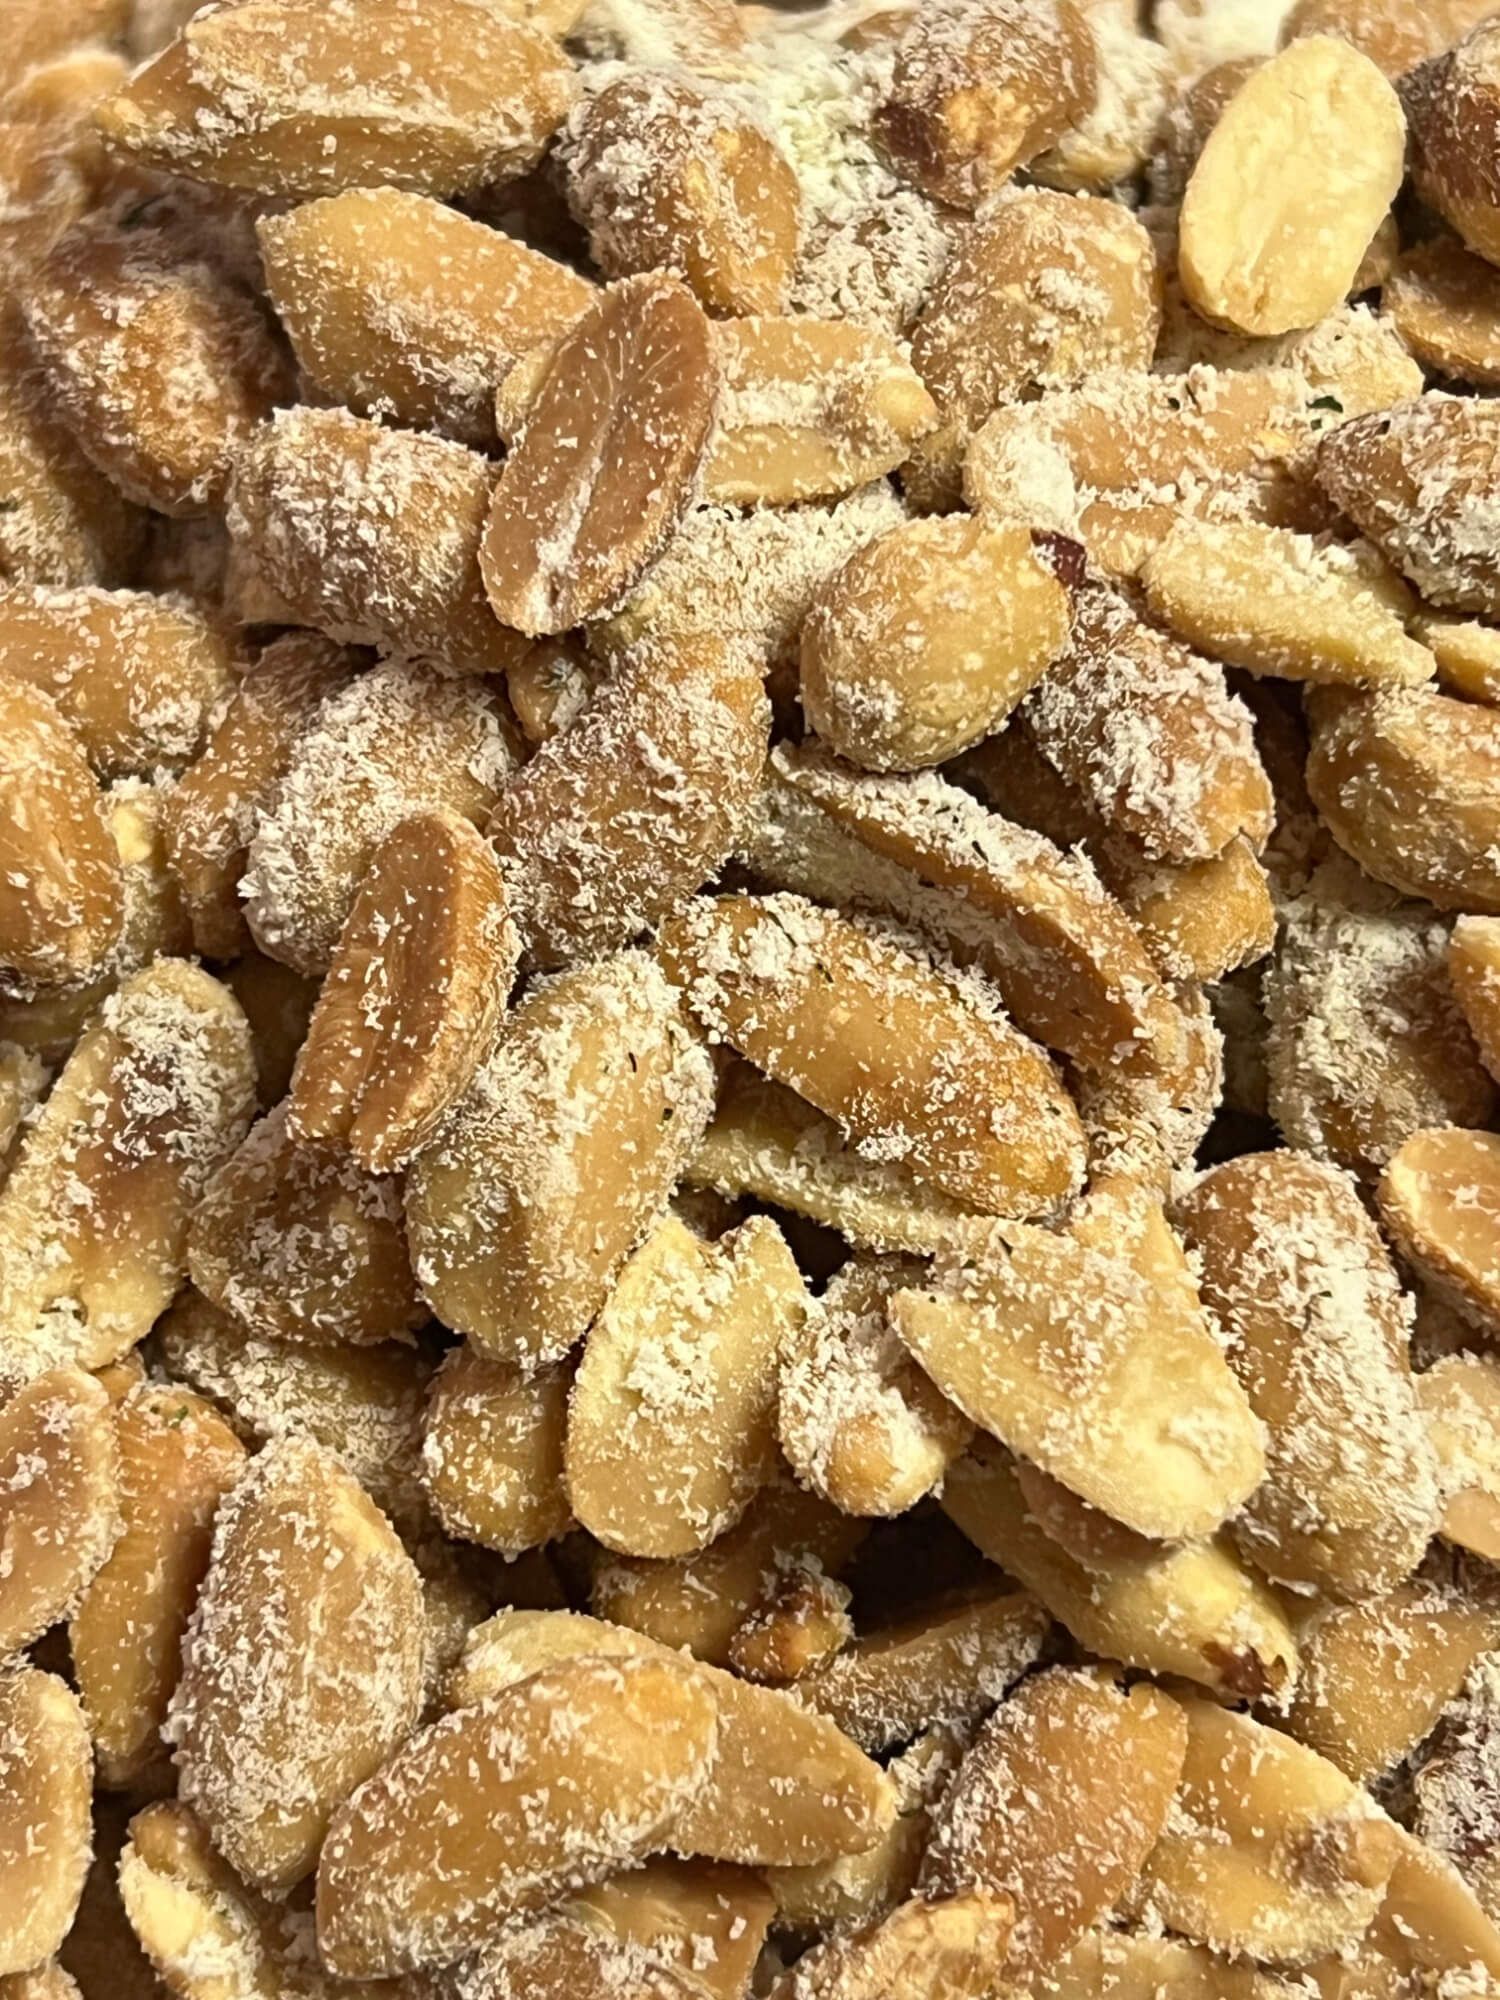 A pile of peanuts covered in sugar on a table.